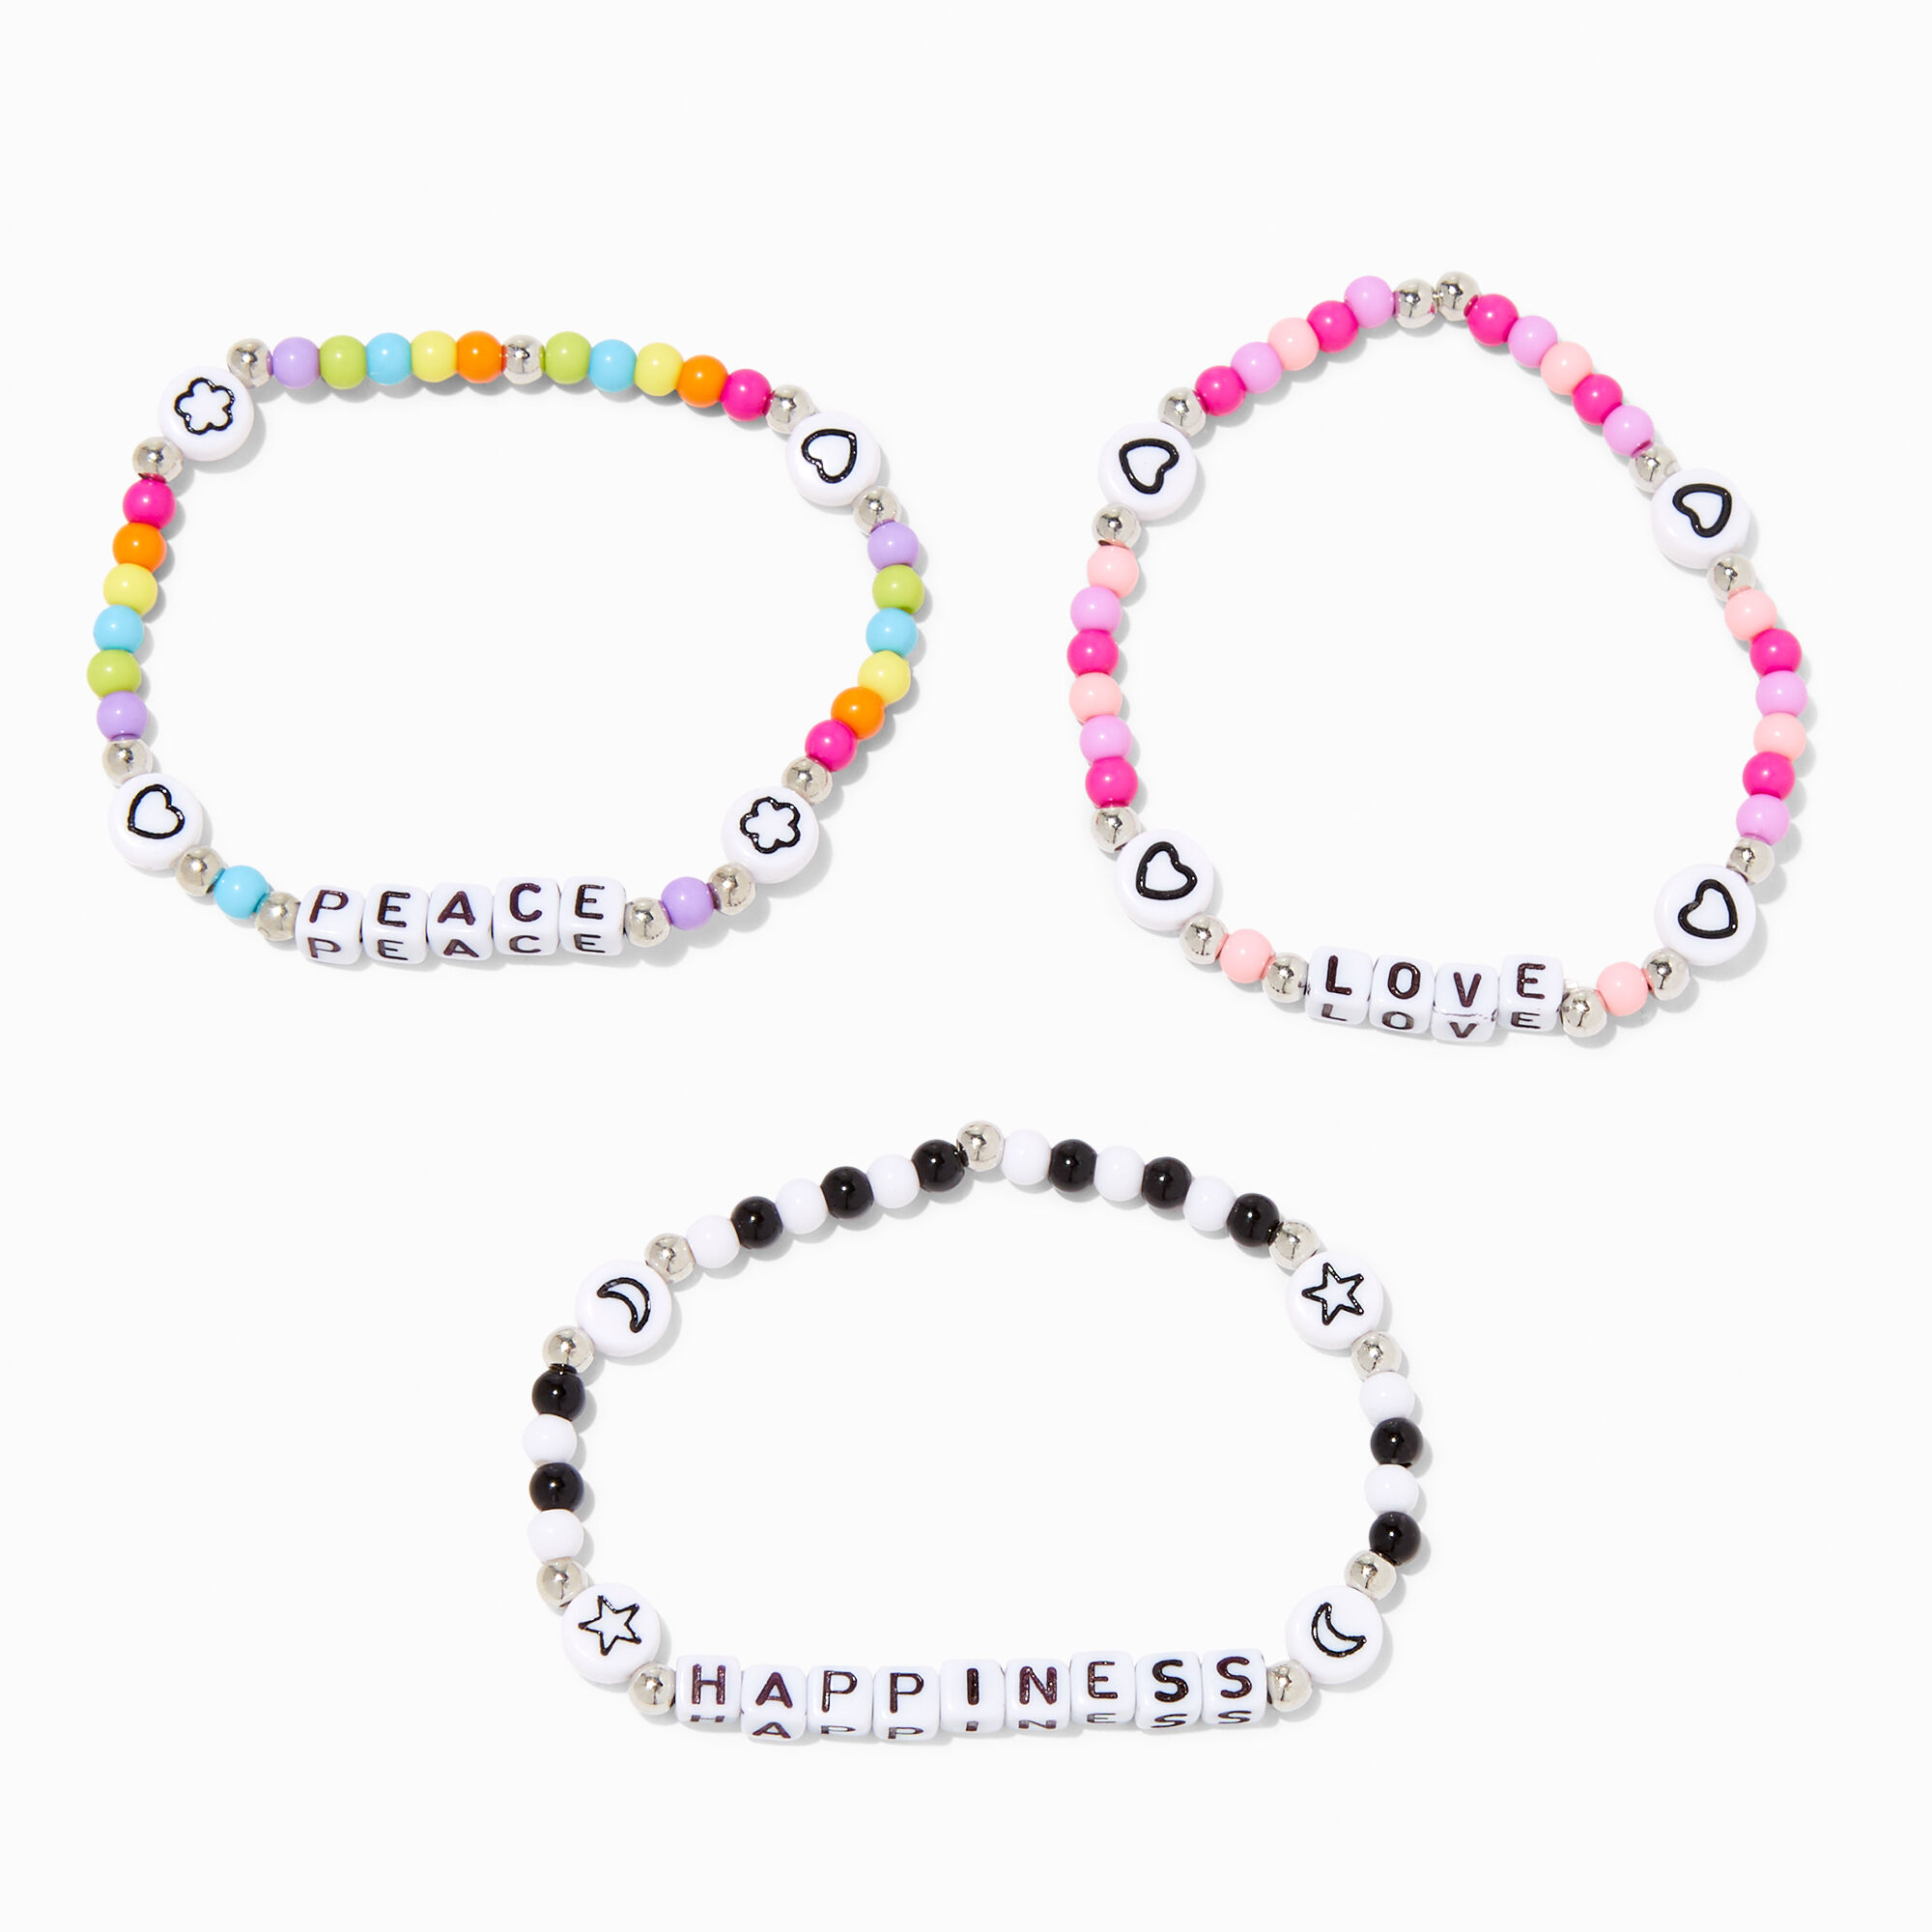 Love, Peace, & Happiness Beaded Stretch Bracelets - 3 Pack | Claire's